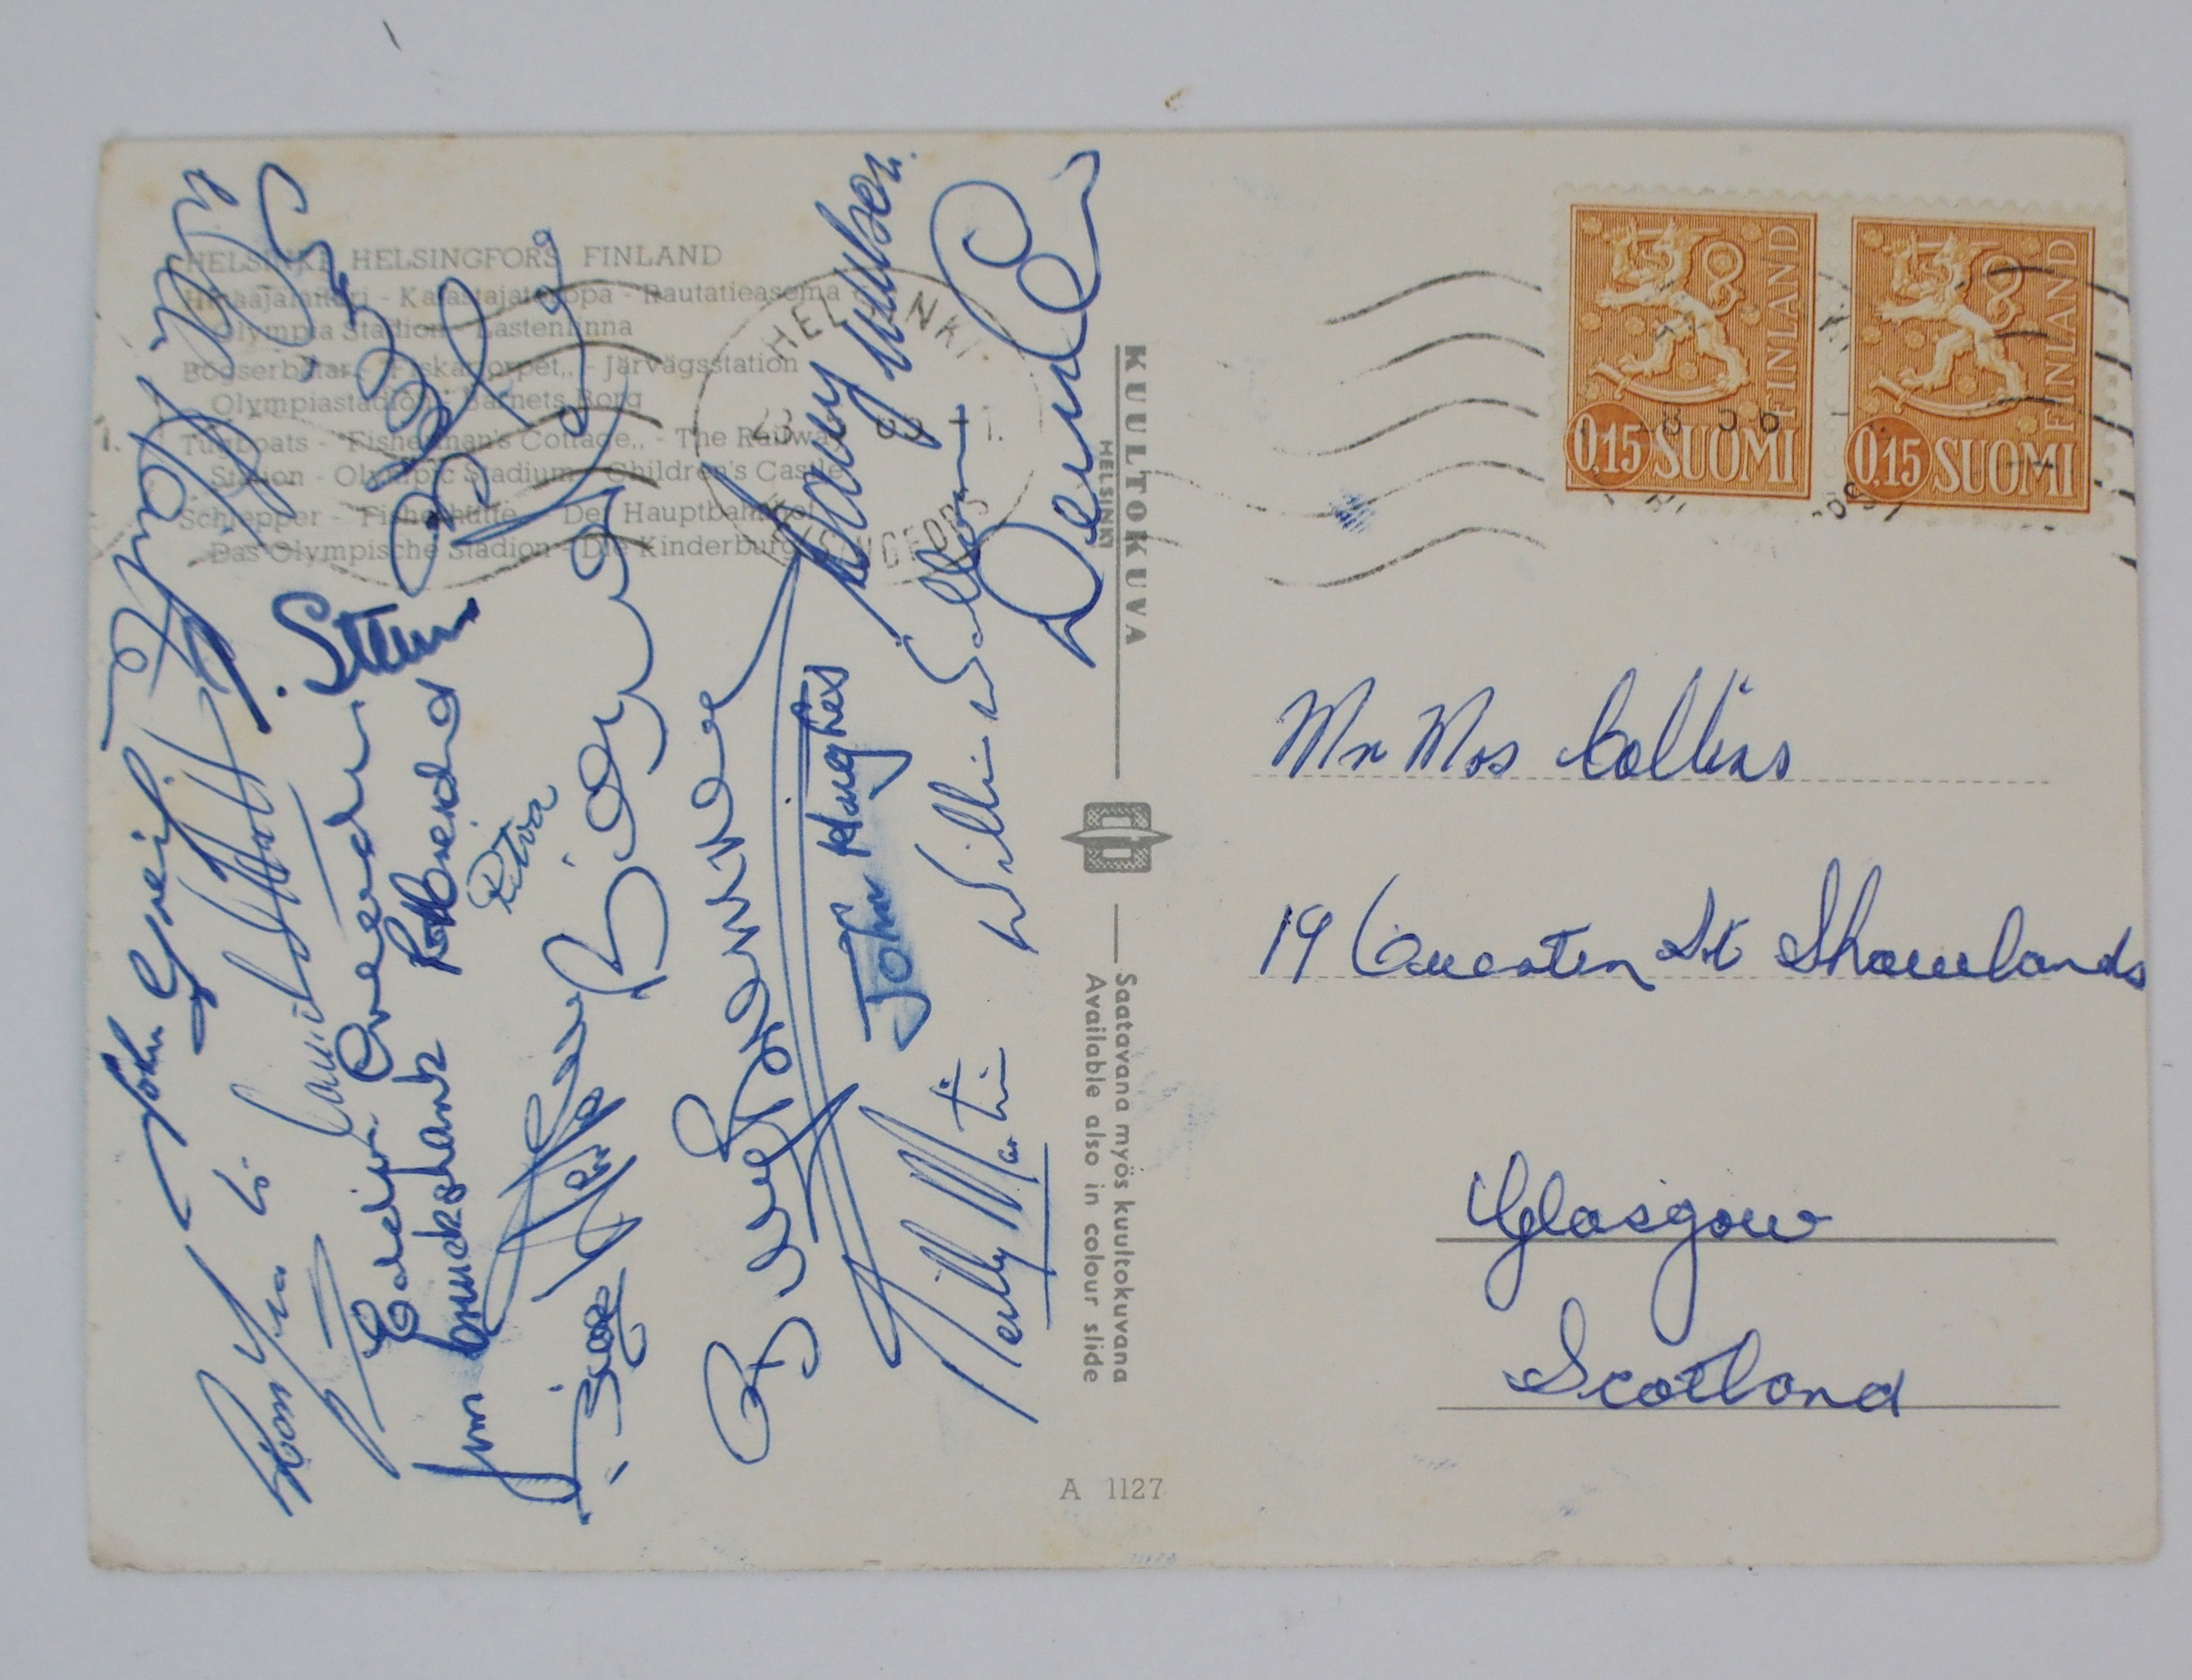 Finland v. Scotland 27/5/1965: An autographed postcard bearing numerous signatures including Denis